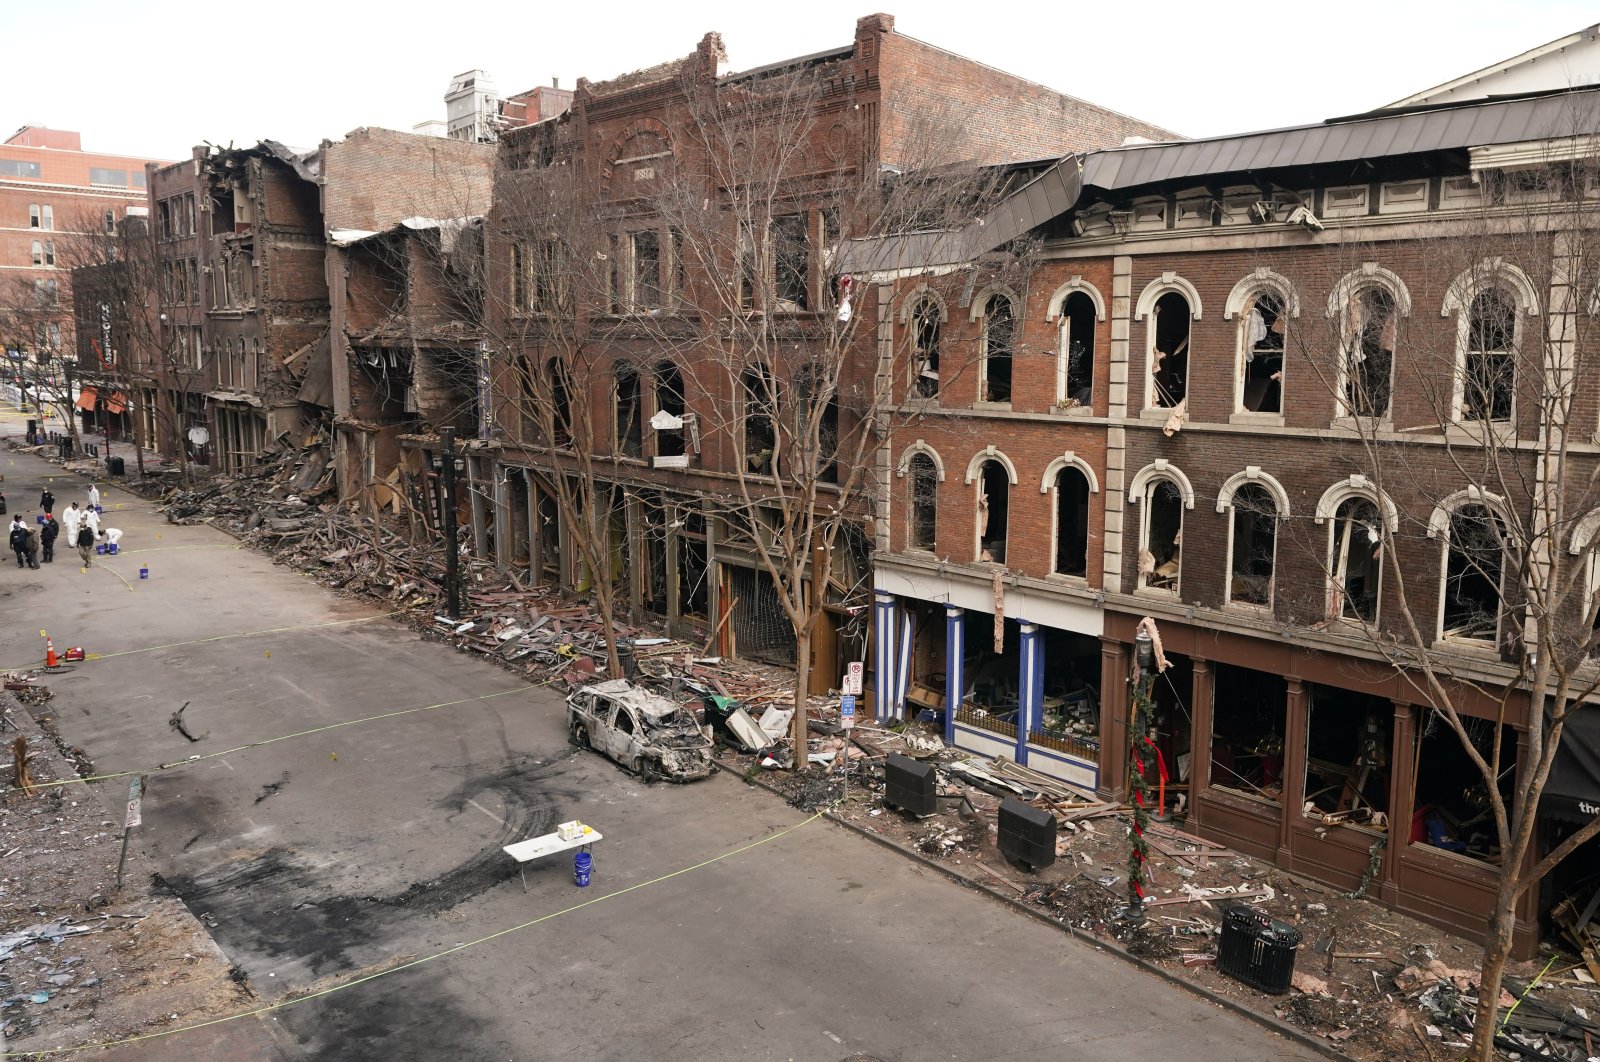 Debris remains on the sidewalks in front of buildings damaged in a Christmas Day explosion in Nashville, Tennessee, U.S., Dec. 29, 2020. (AP Photo)